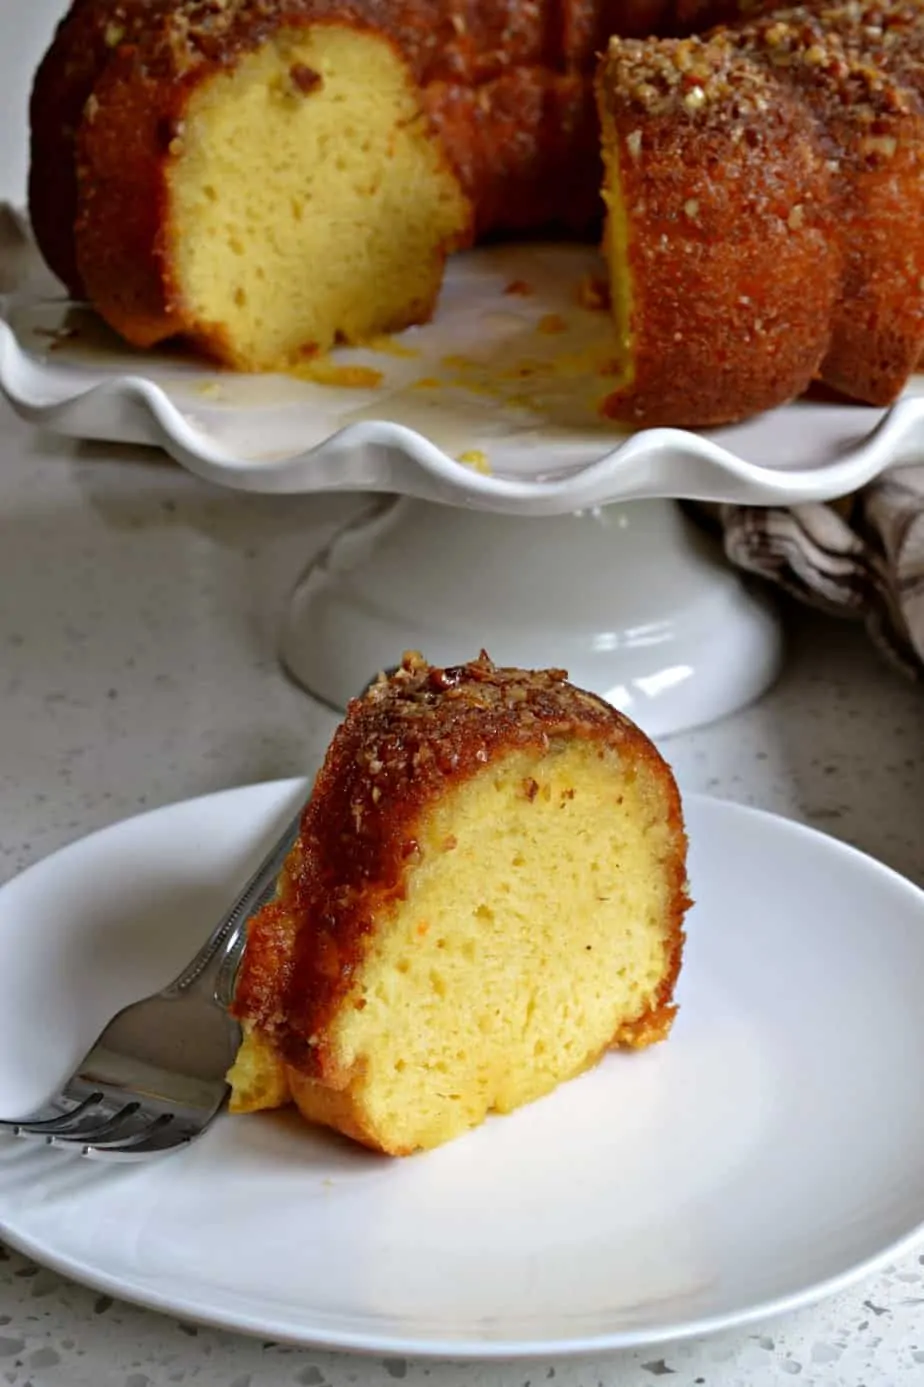 A moist easy Rum Cake with a butter rum glaze that comes together quickly using a yellow butter cake mix